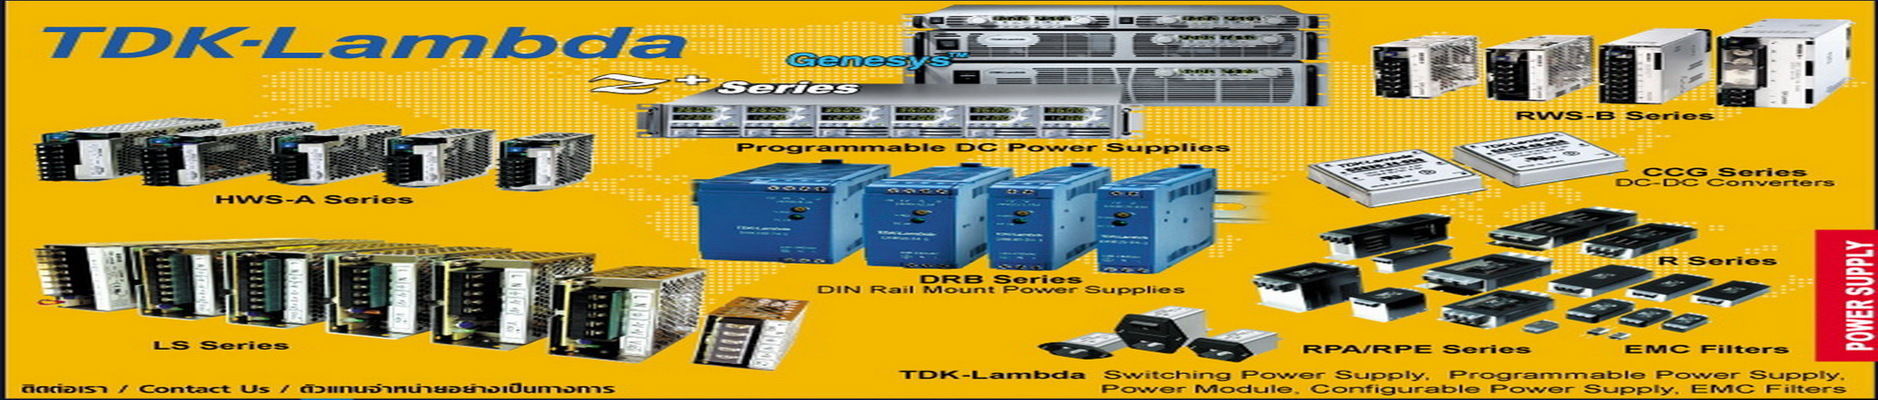 AC-DC switching power supplies, DC-DC converters, power line EMC filters and wireless power transfer system for industrial equipment